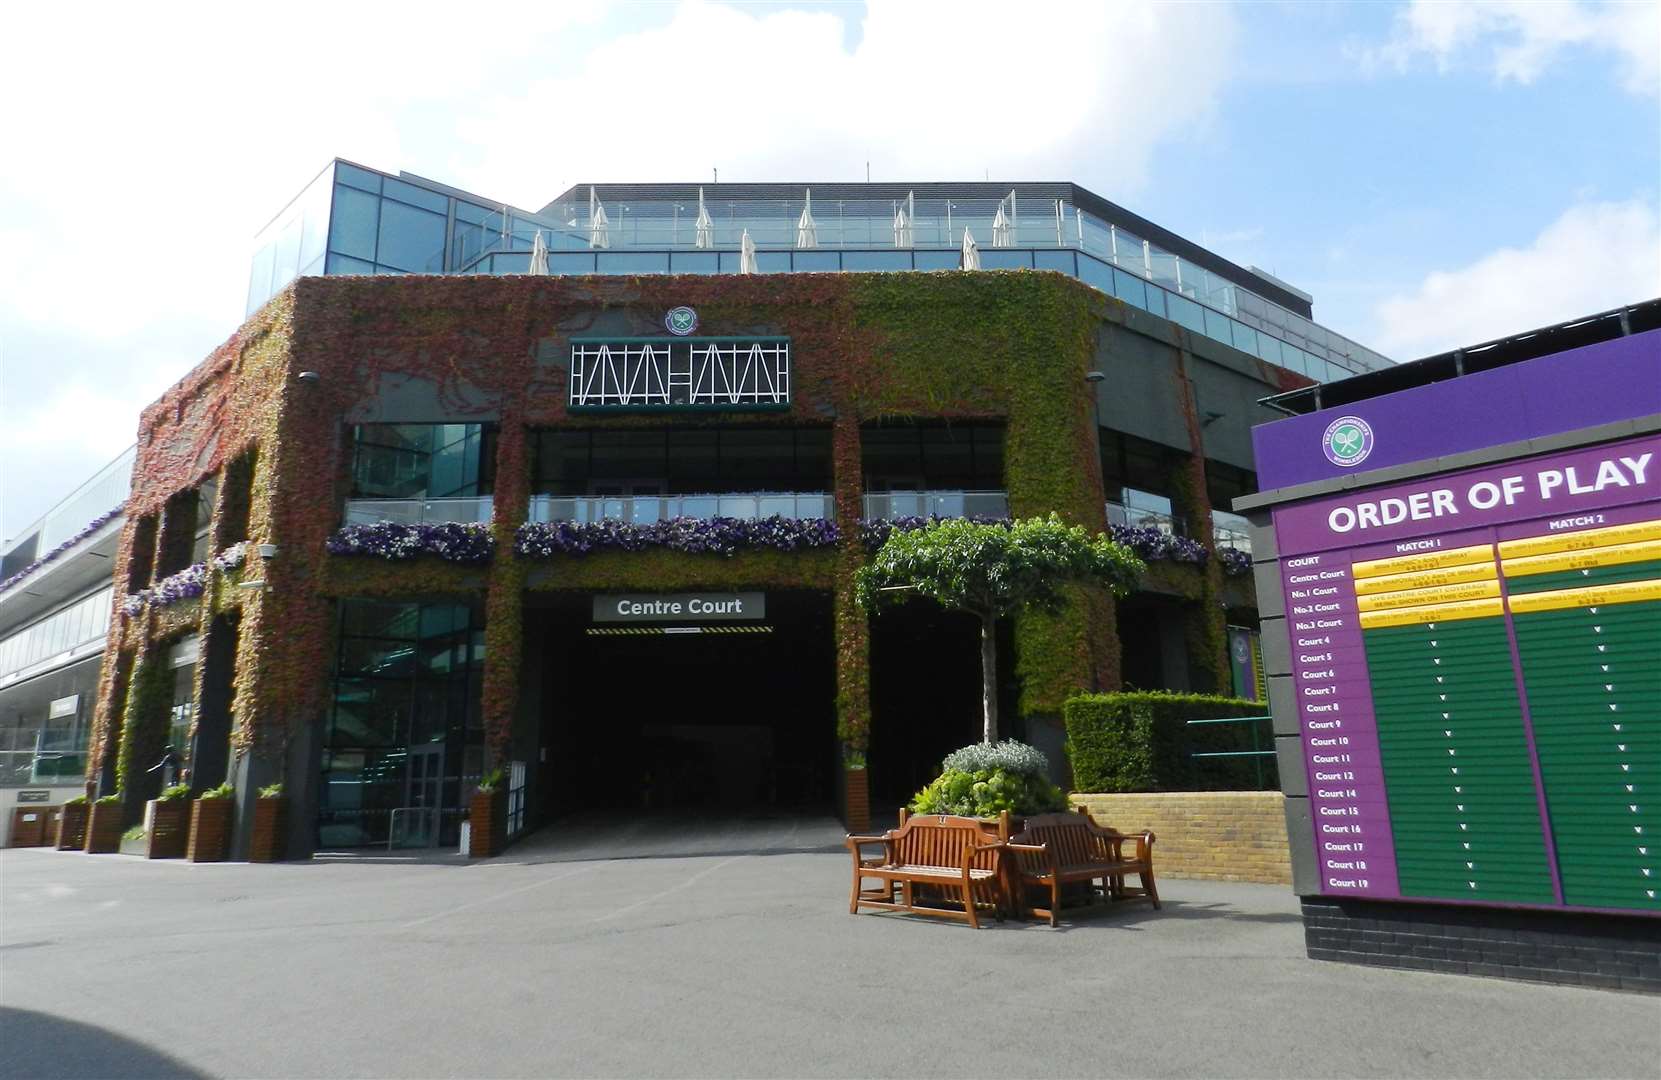 Wimbledon was the scene of back-to-back singles triumphs for Don Budge in 1937 and 1938.